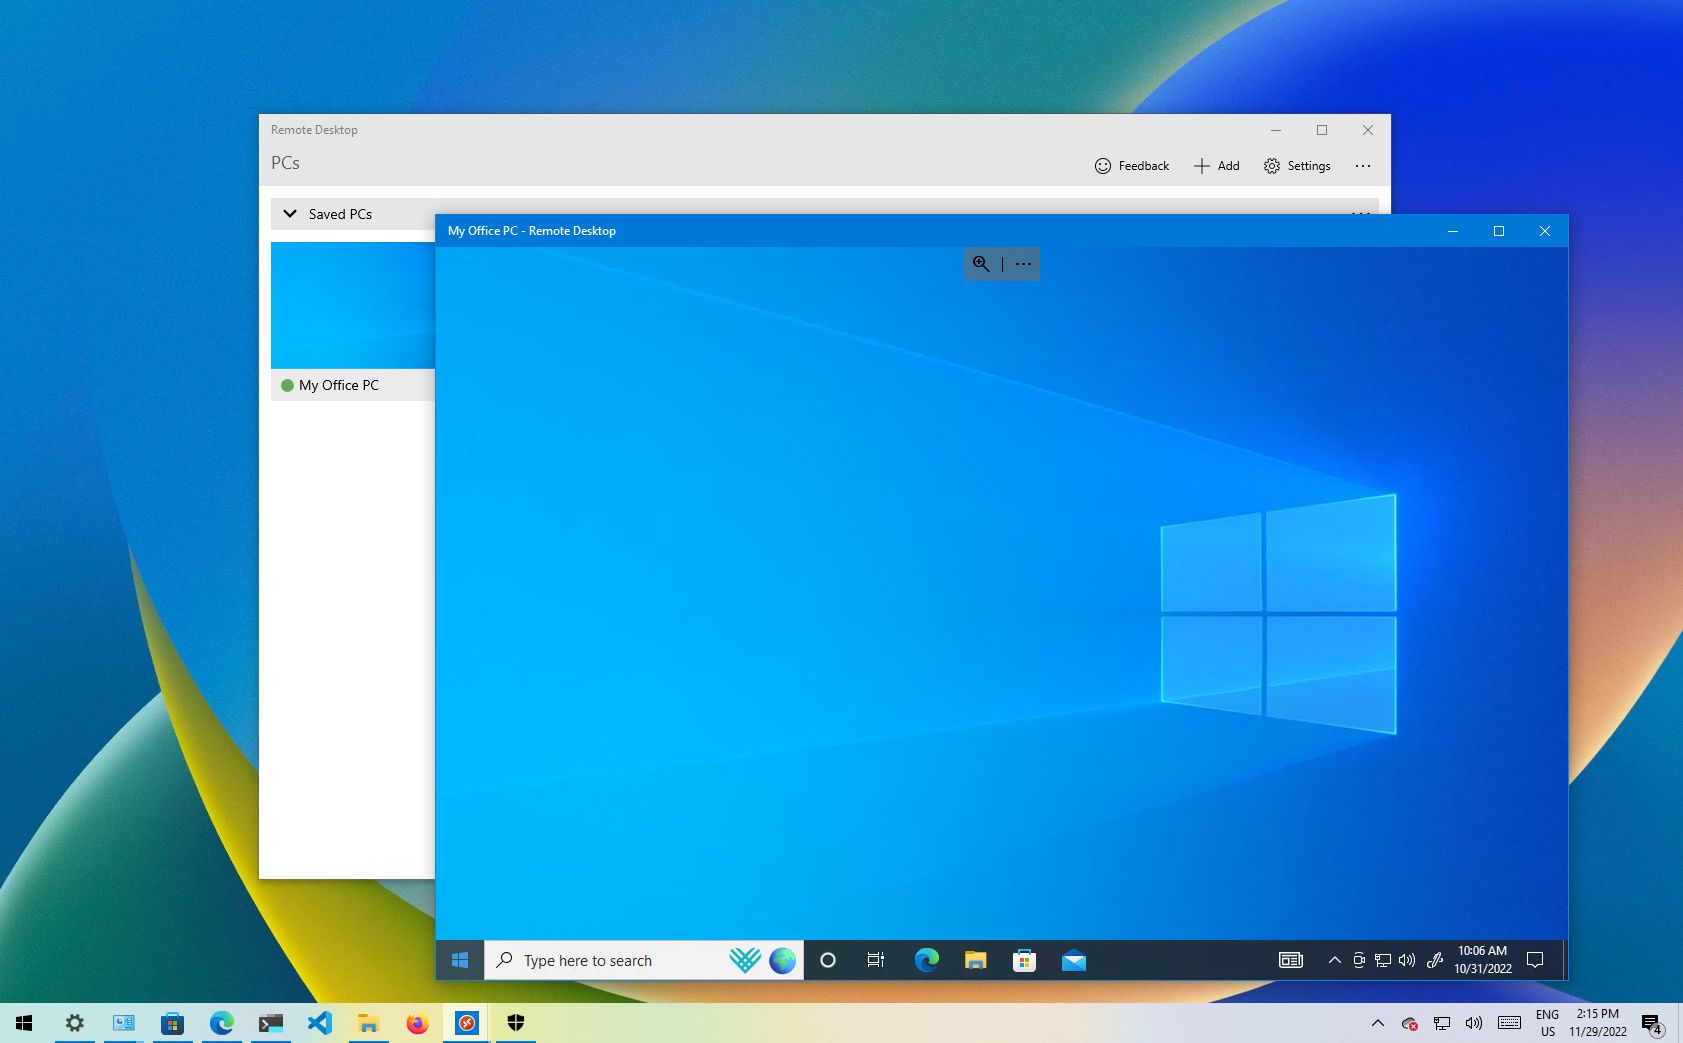 How to use Remote Desktop app to connect to a PC on Windows 10